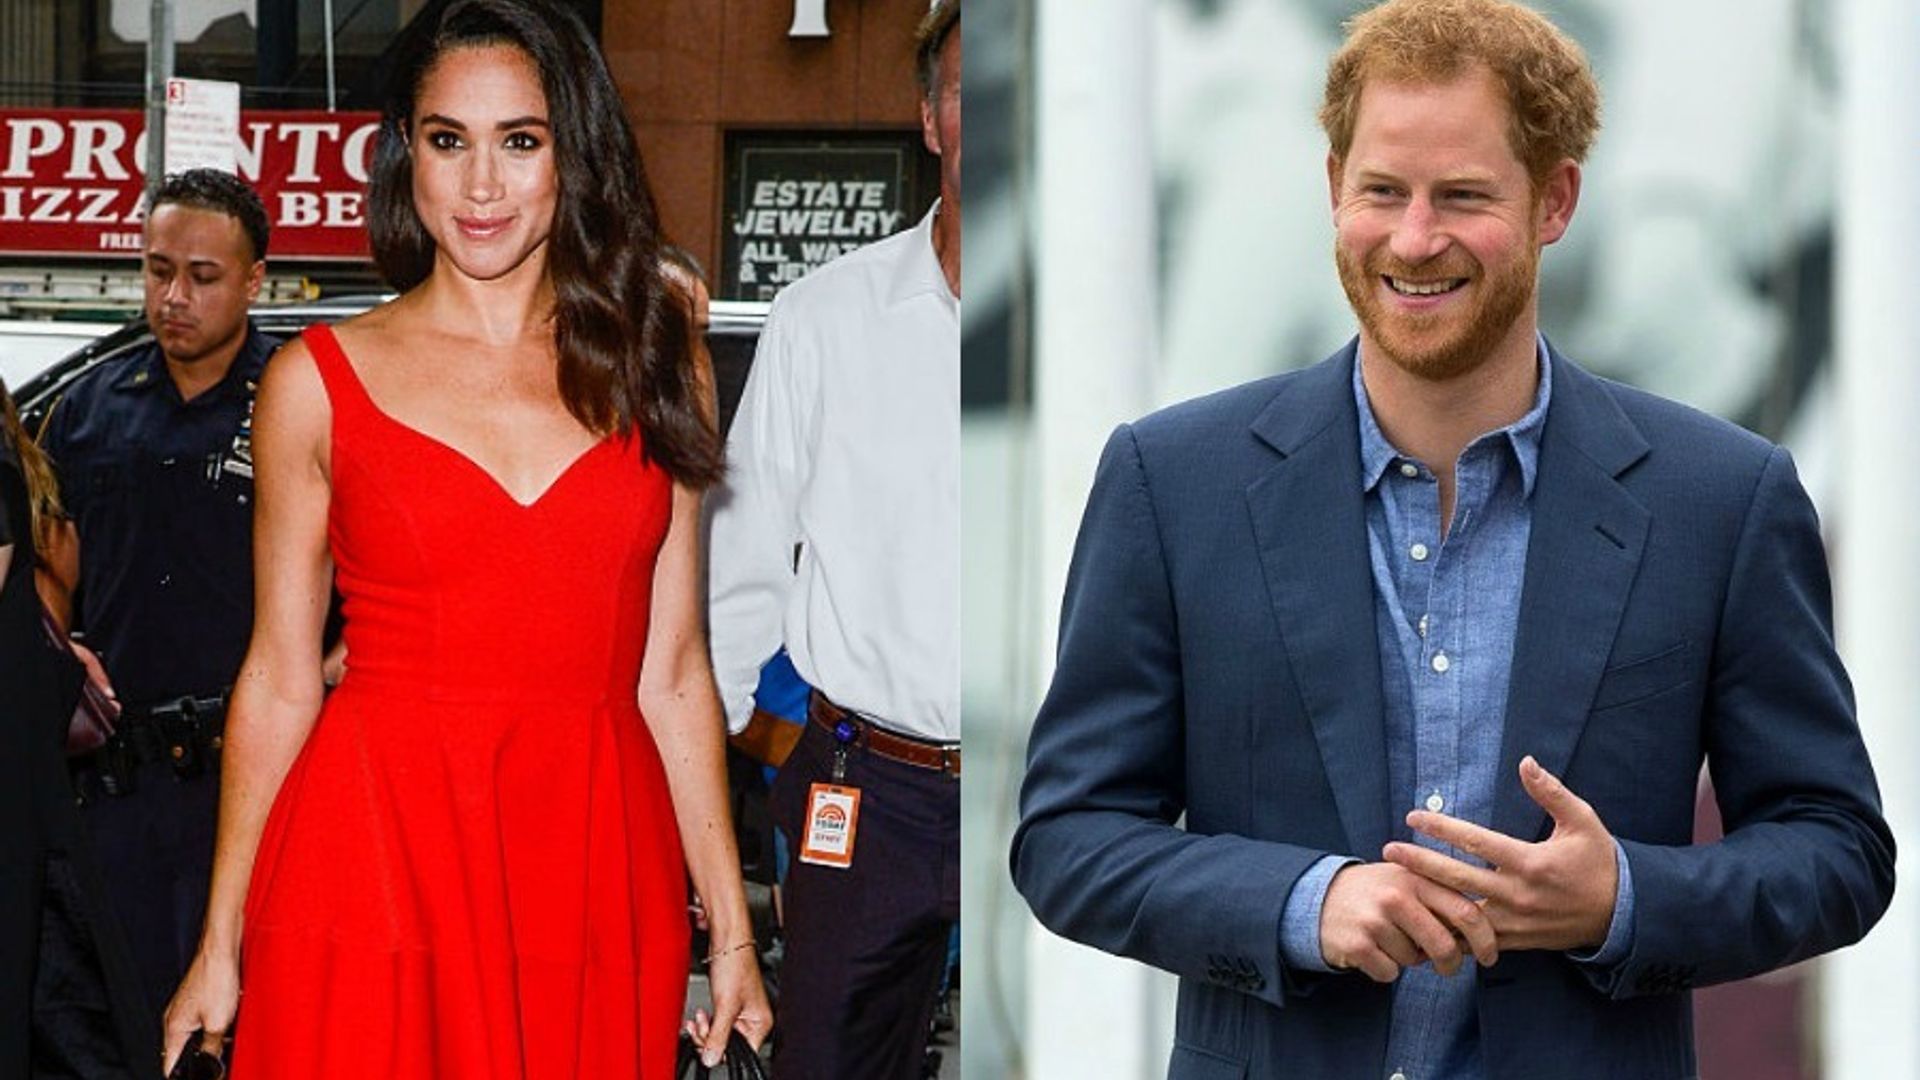 WATCH: Meghan Markle chooses Prince Harry in HELLO!'s exclusive video!